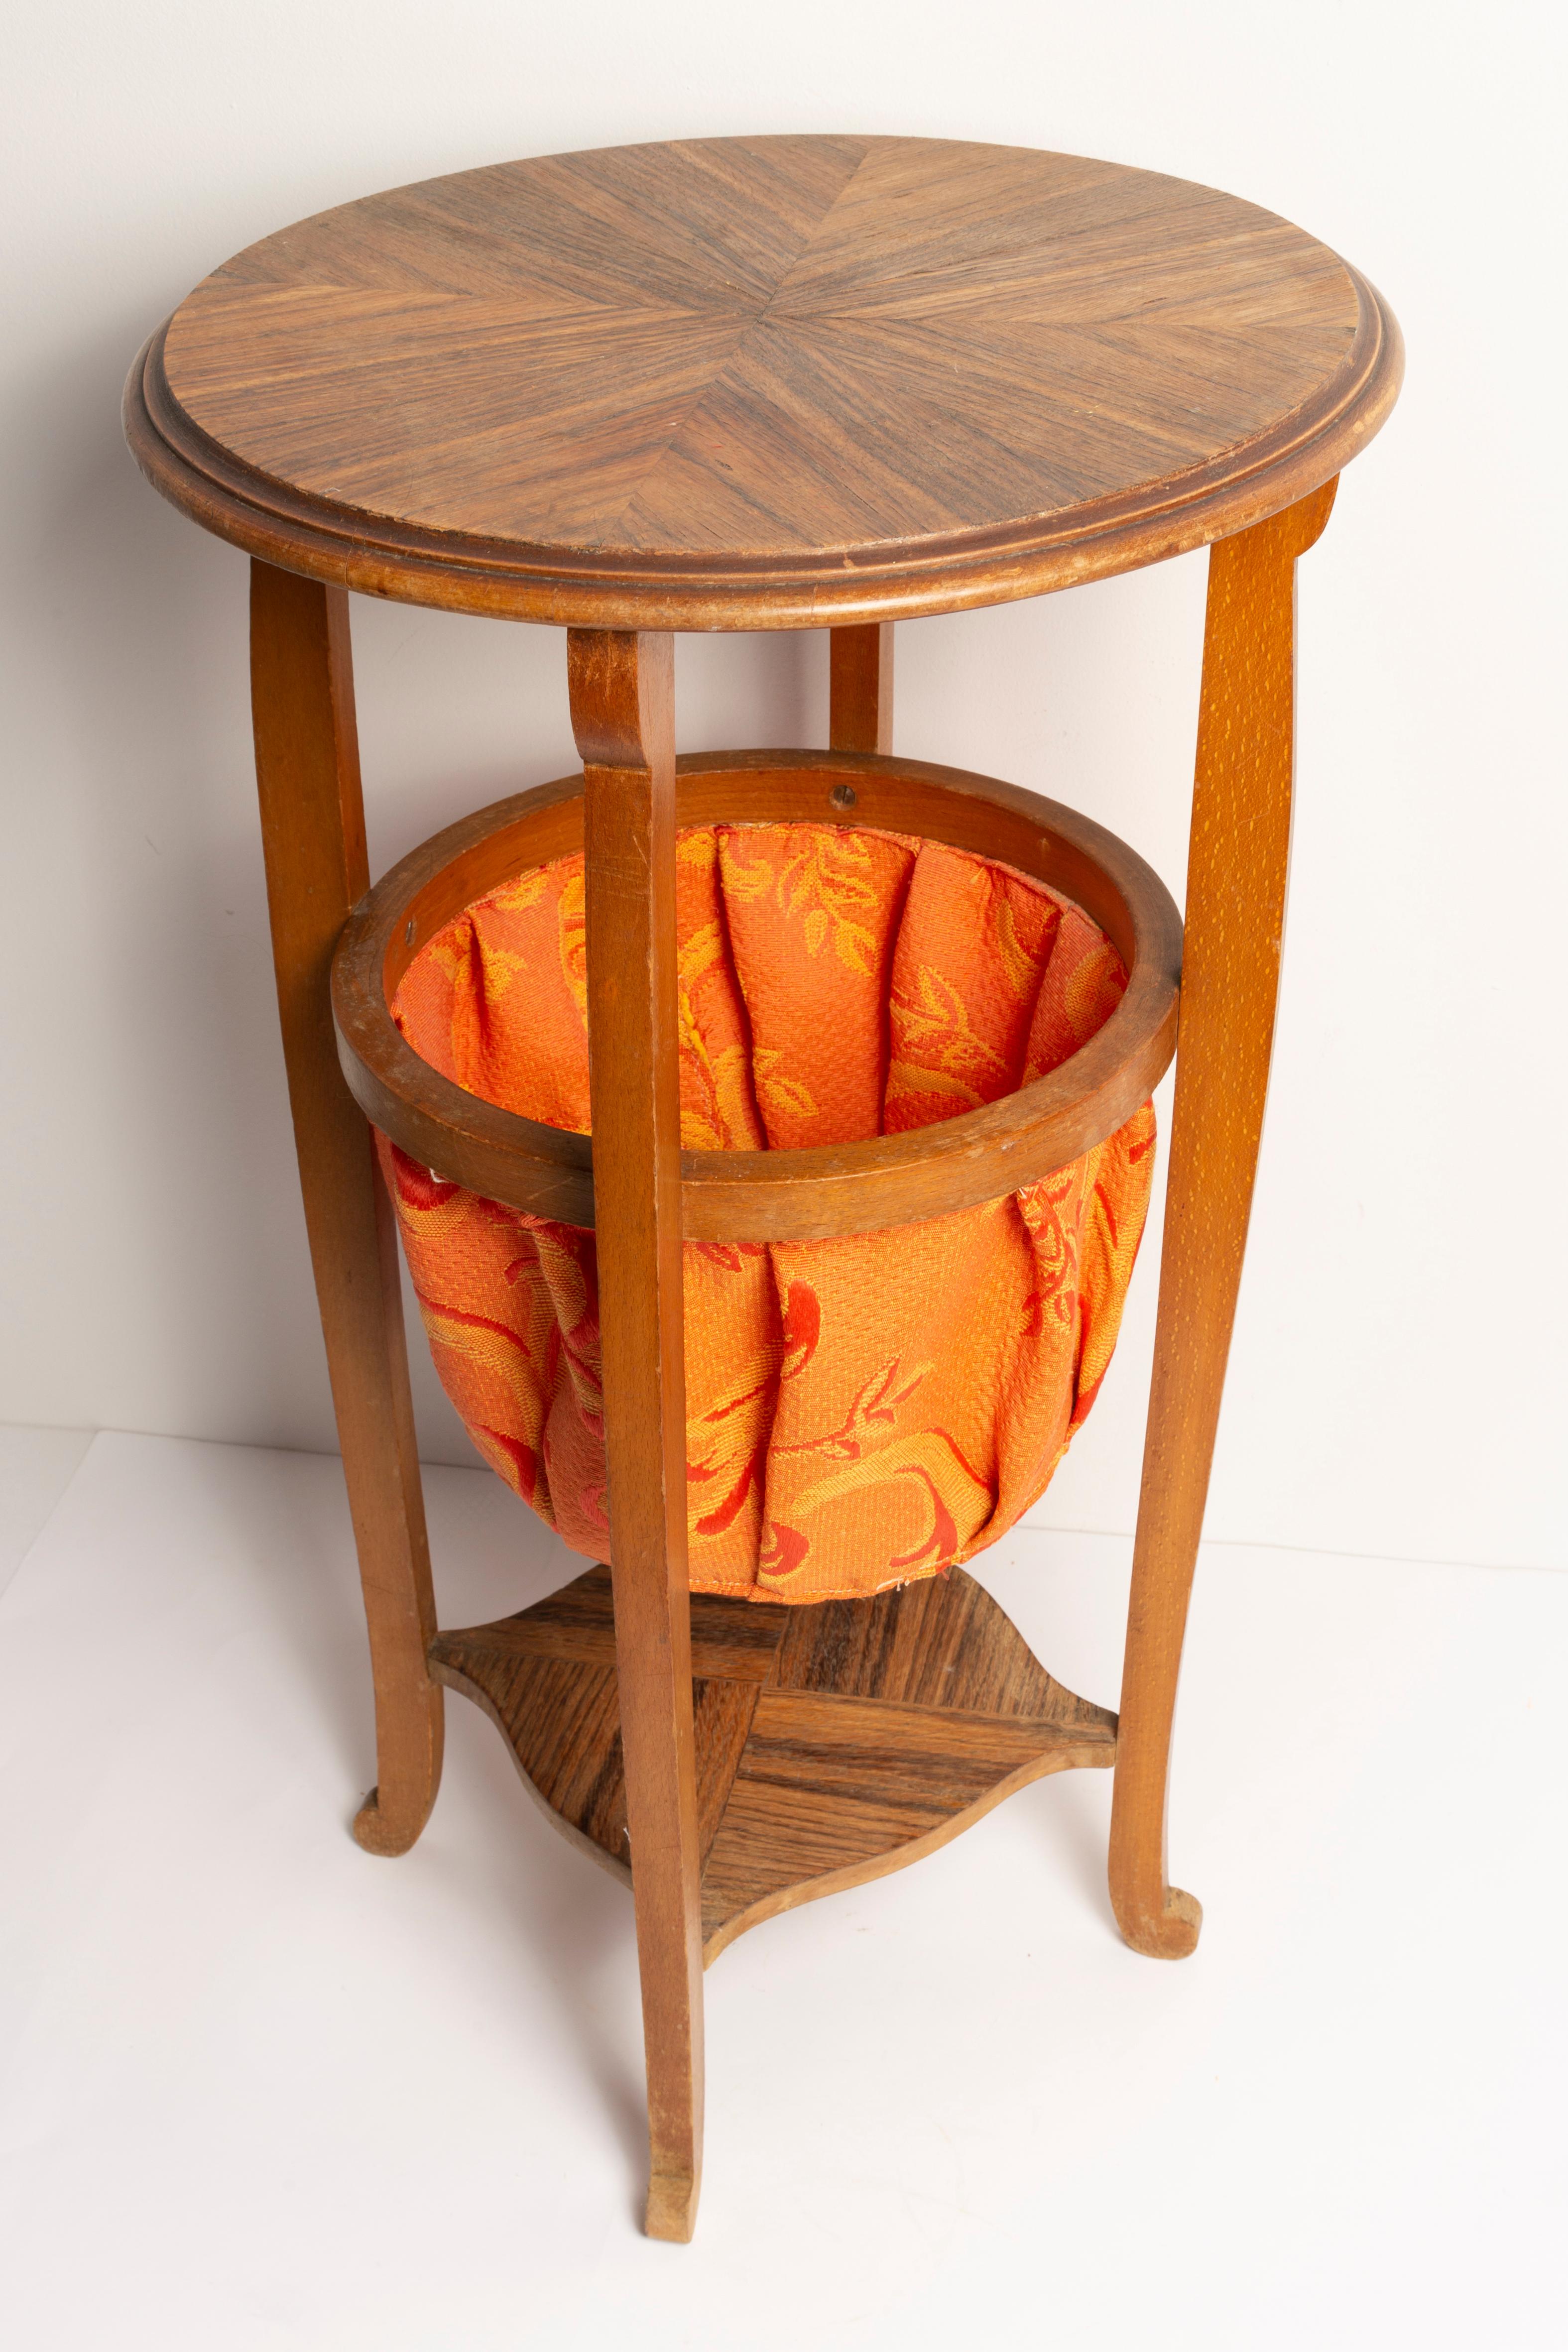 Beech Midcentury Round Table, Light Wood, Poland, 1960s For Sale